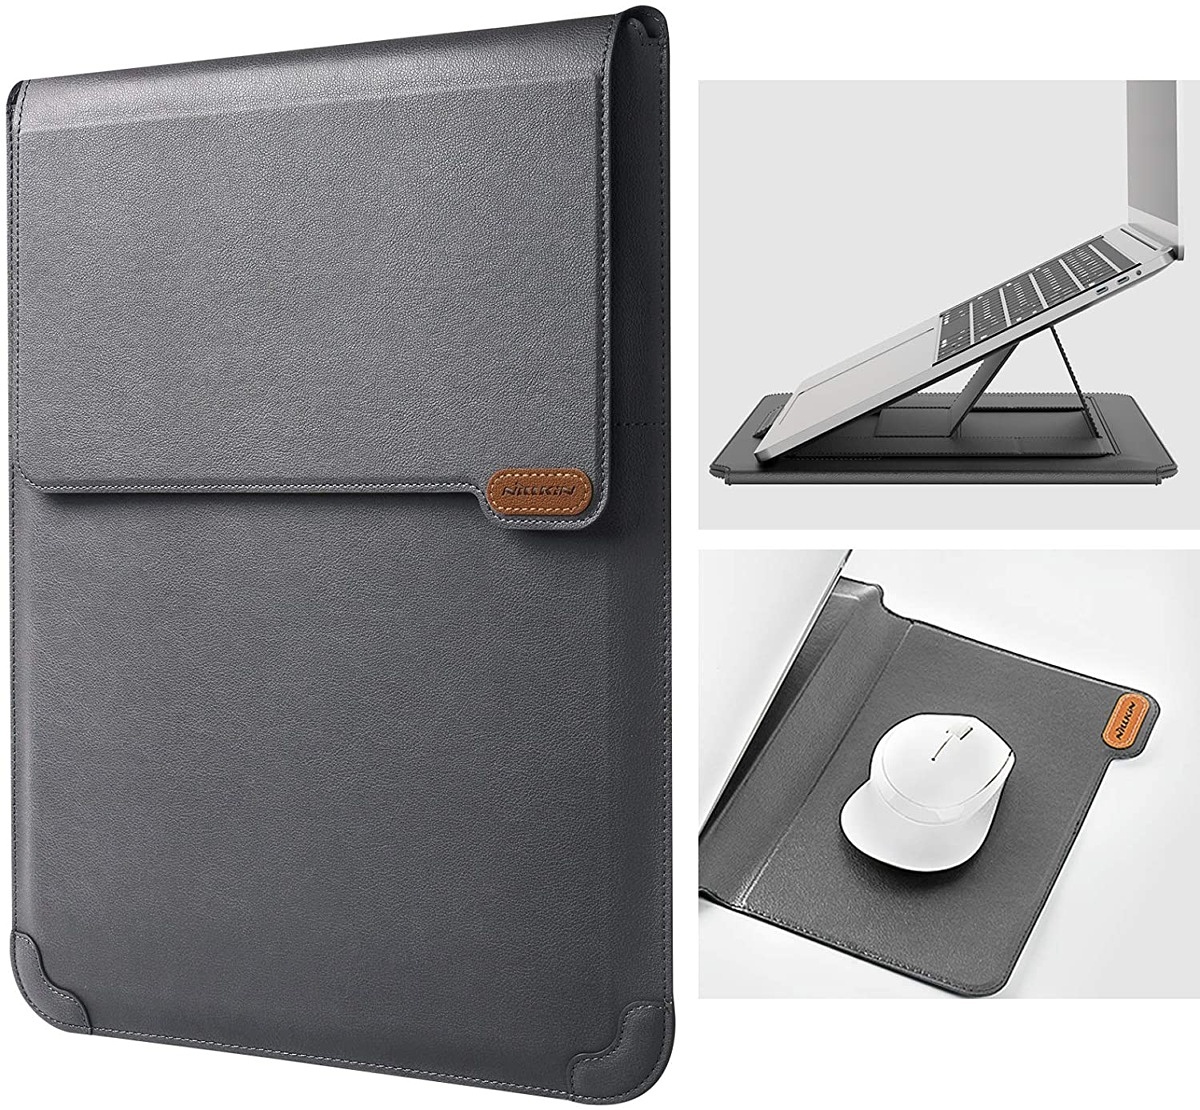 Nillkin laptop sleeve with stand